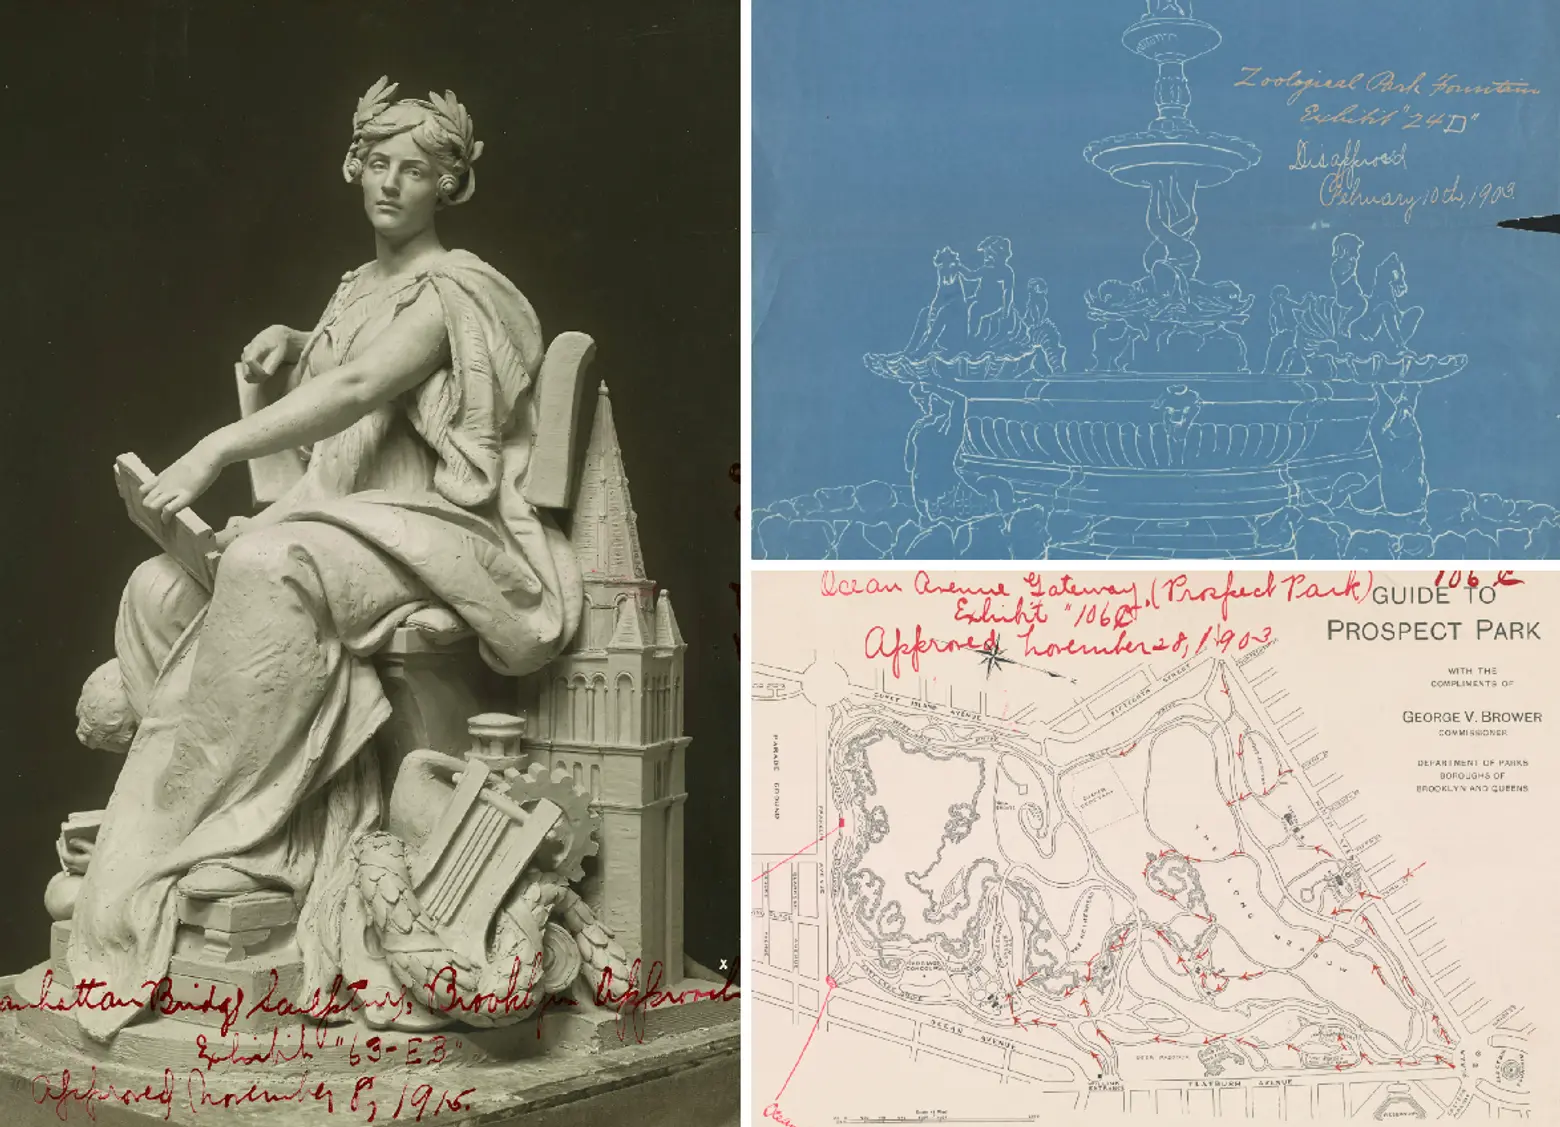 See 120 years of NYC art and architecture planning at the Public Design Commission’s Archives